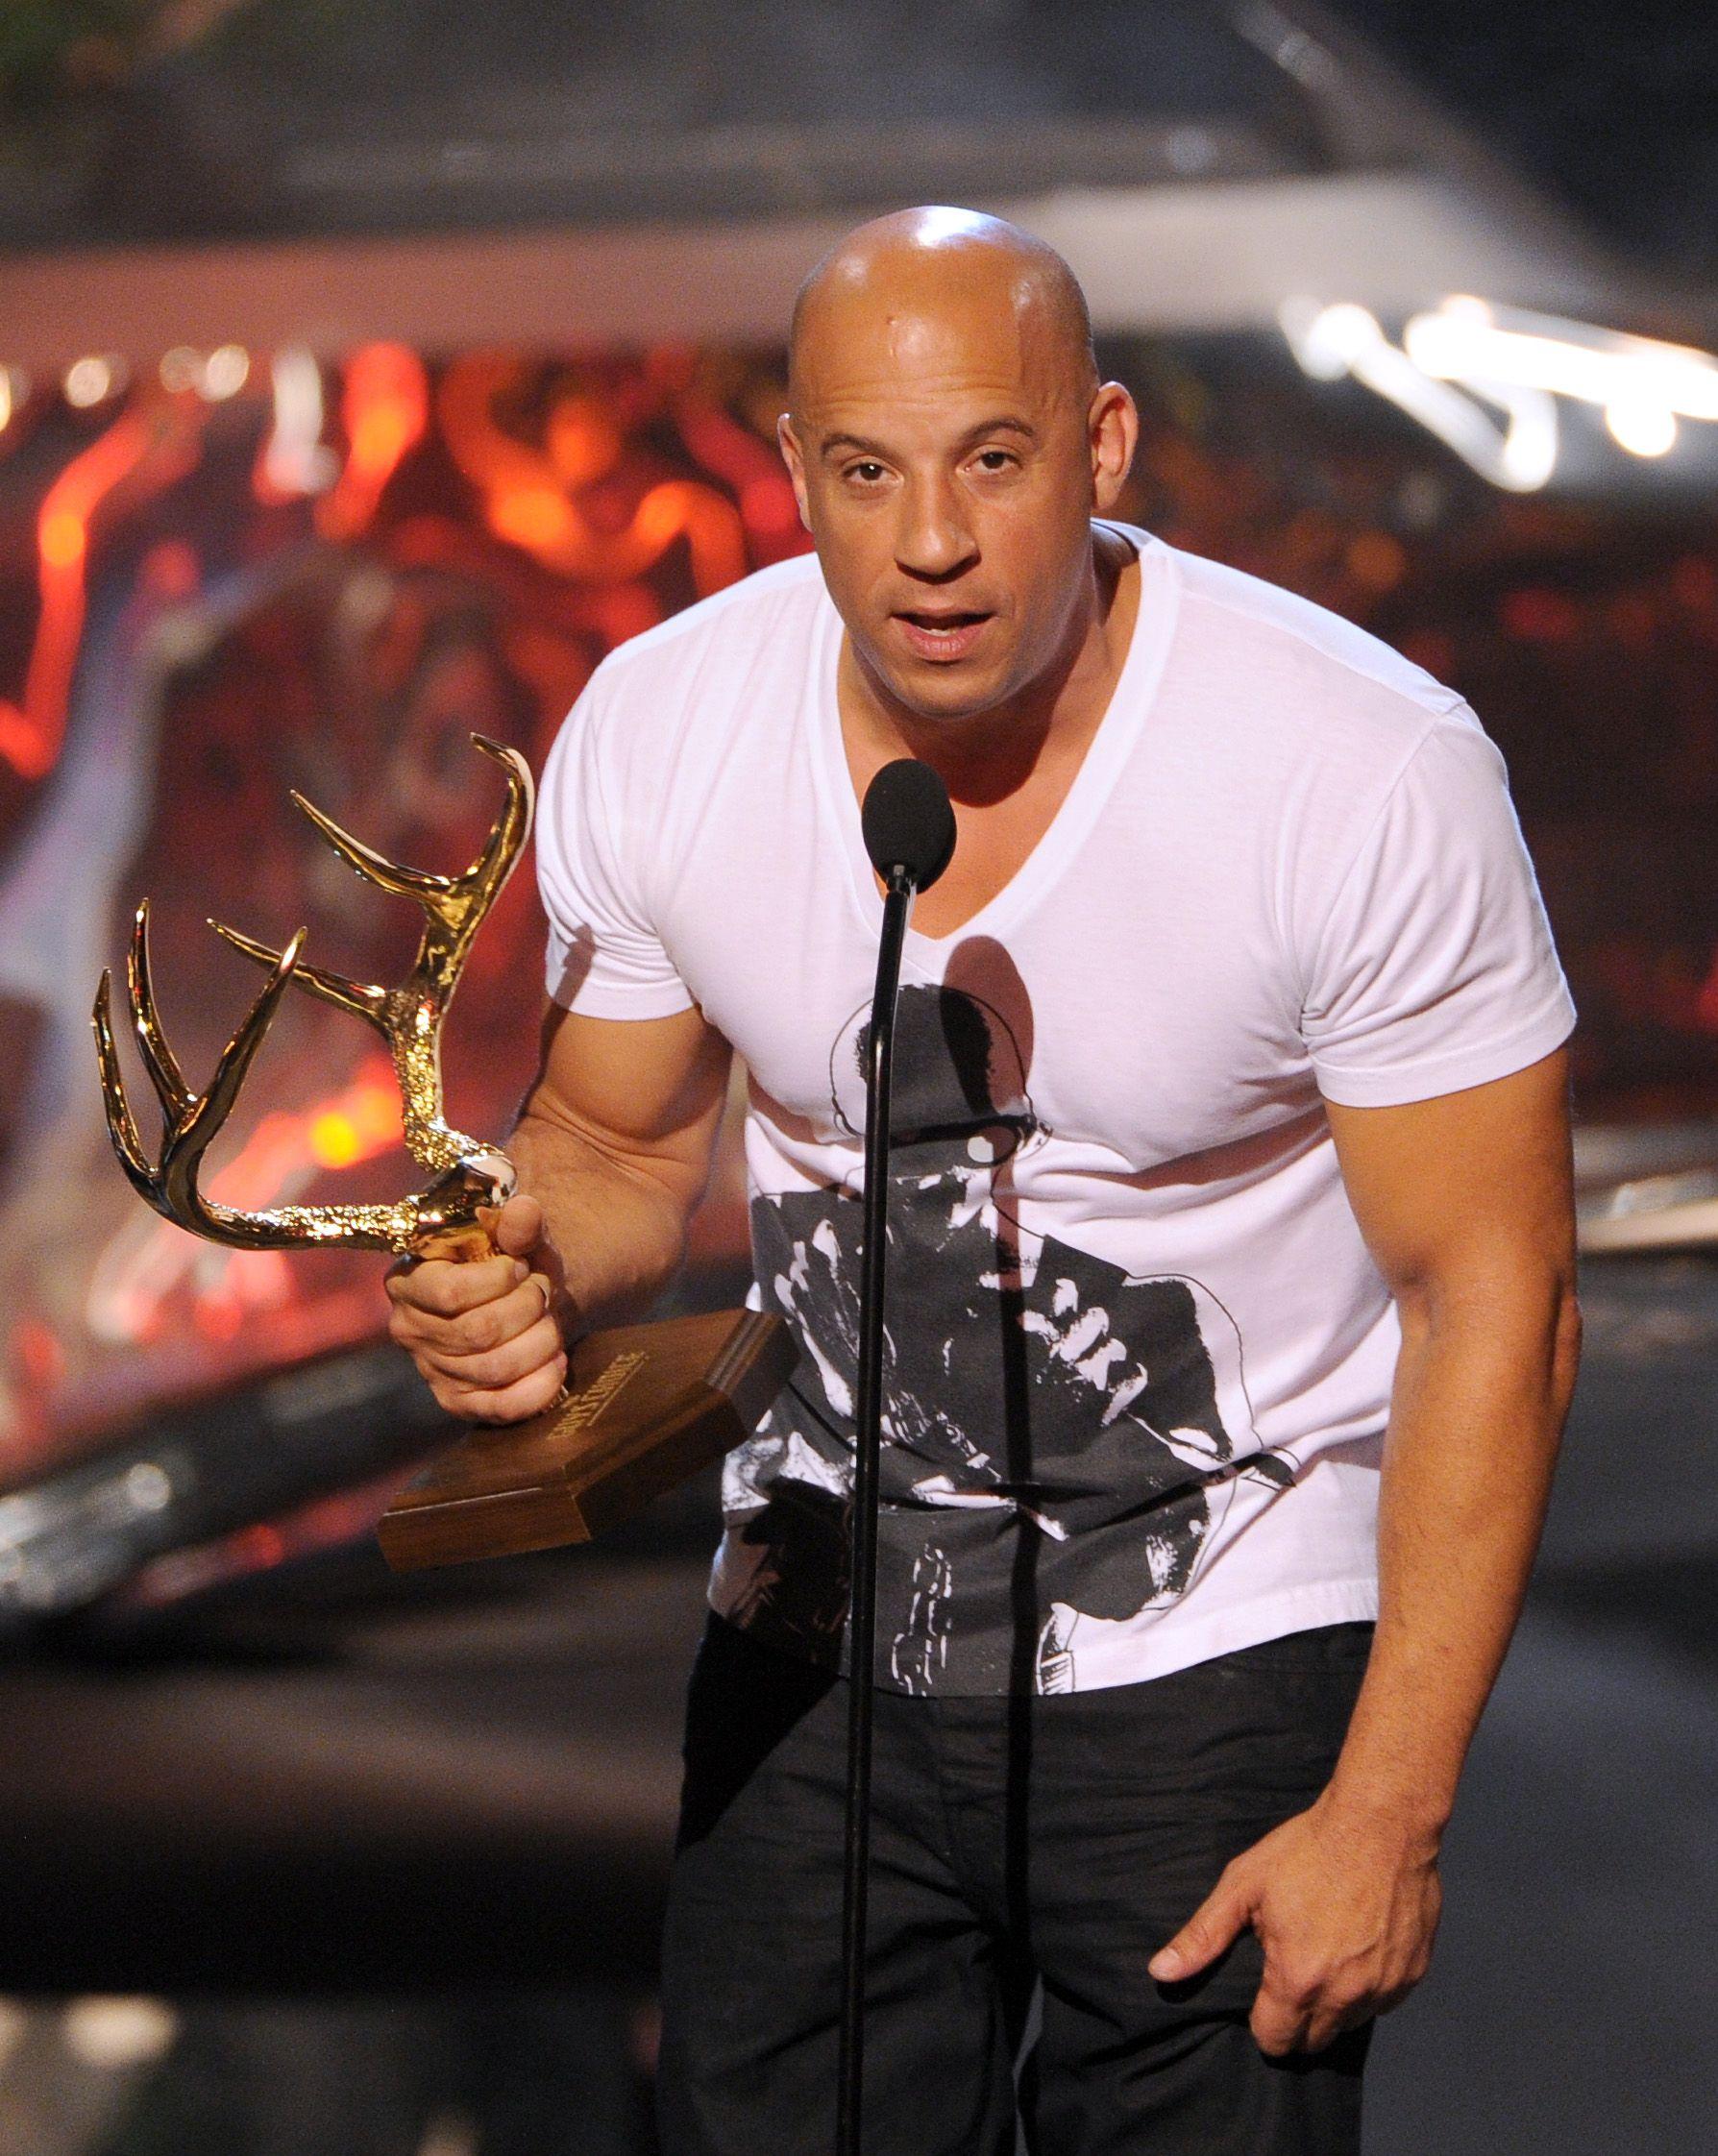 Handsome photos of the 'Fast and the Furious' star Vin Diesel.